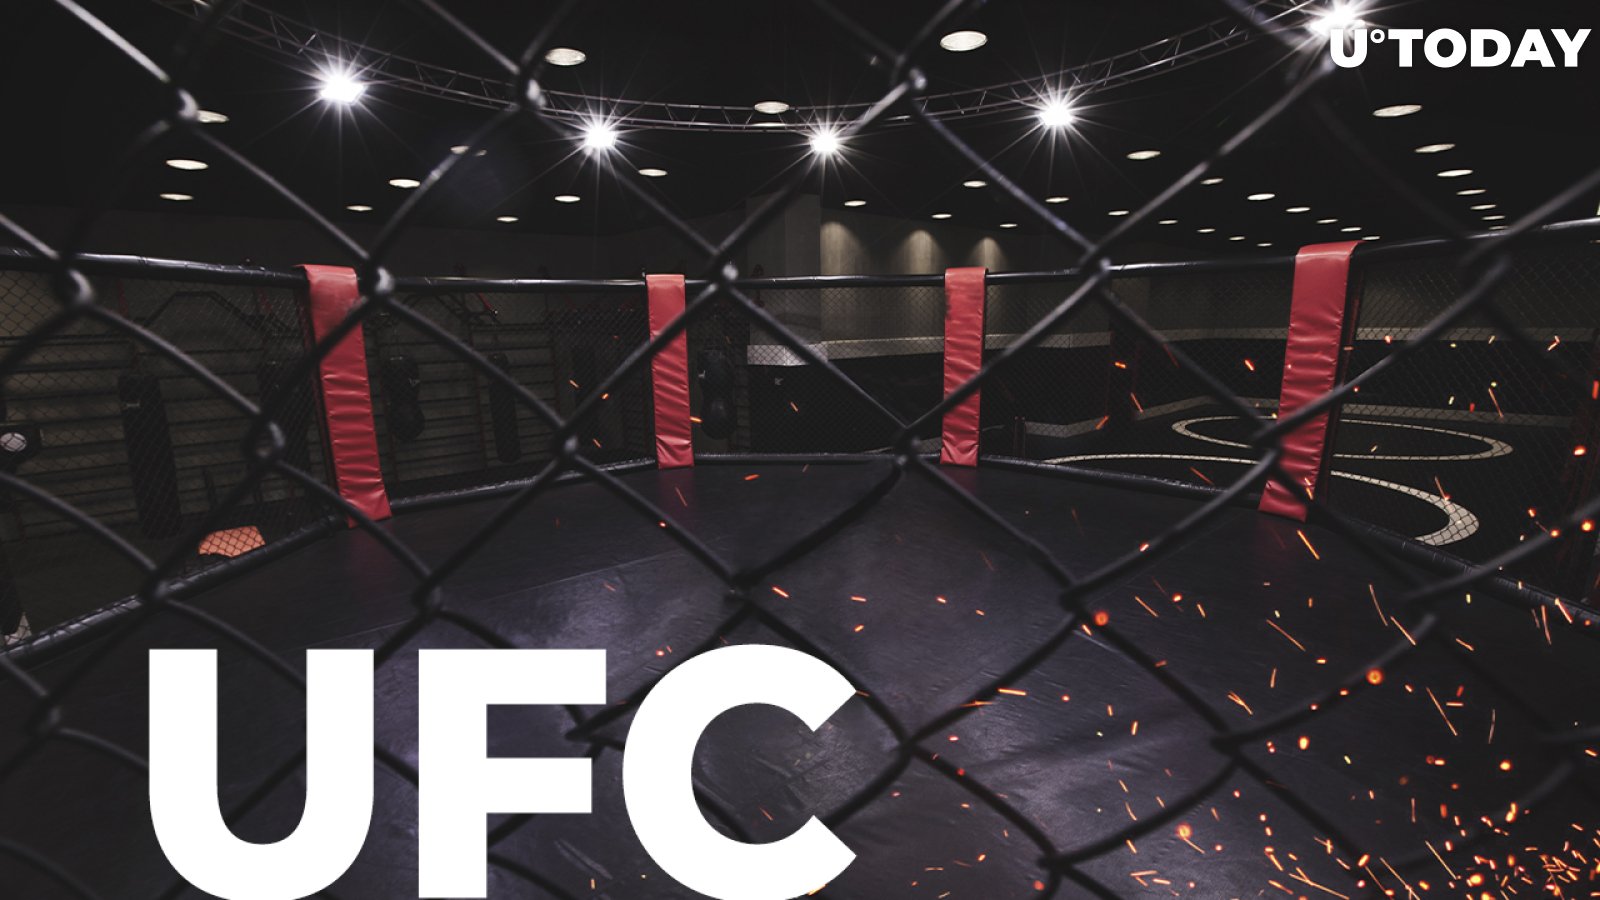 UFC to Pay Fighters in Cryptocurrency